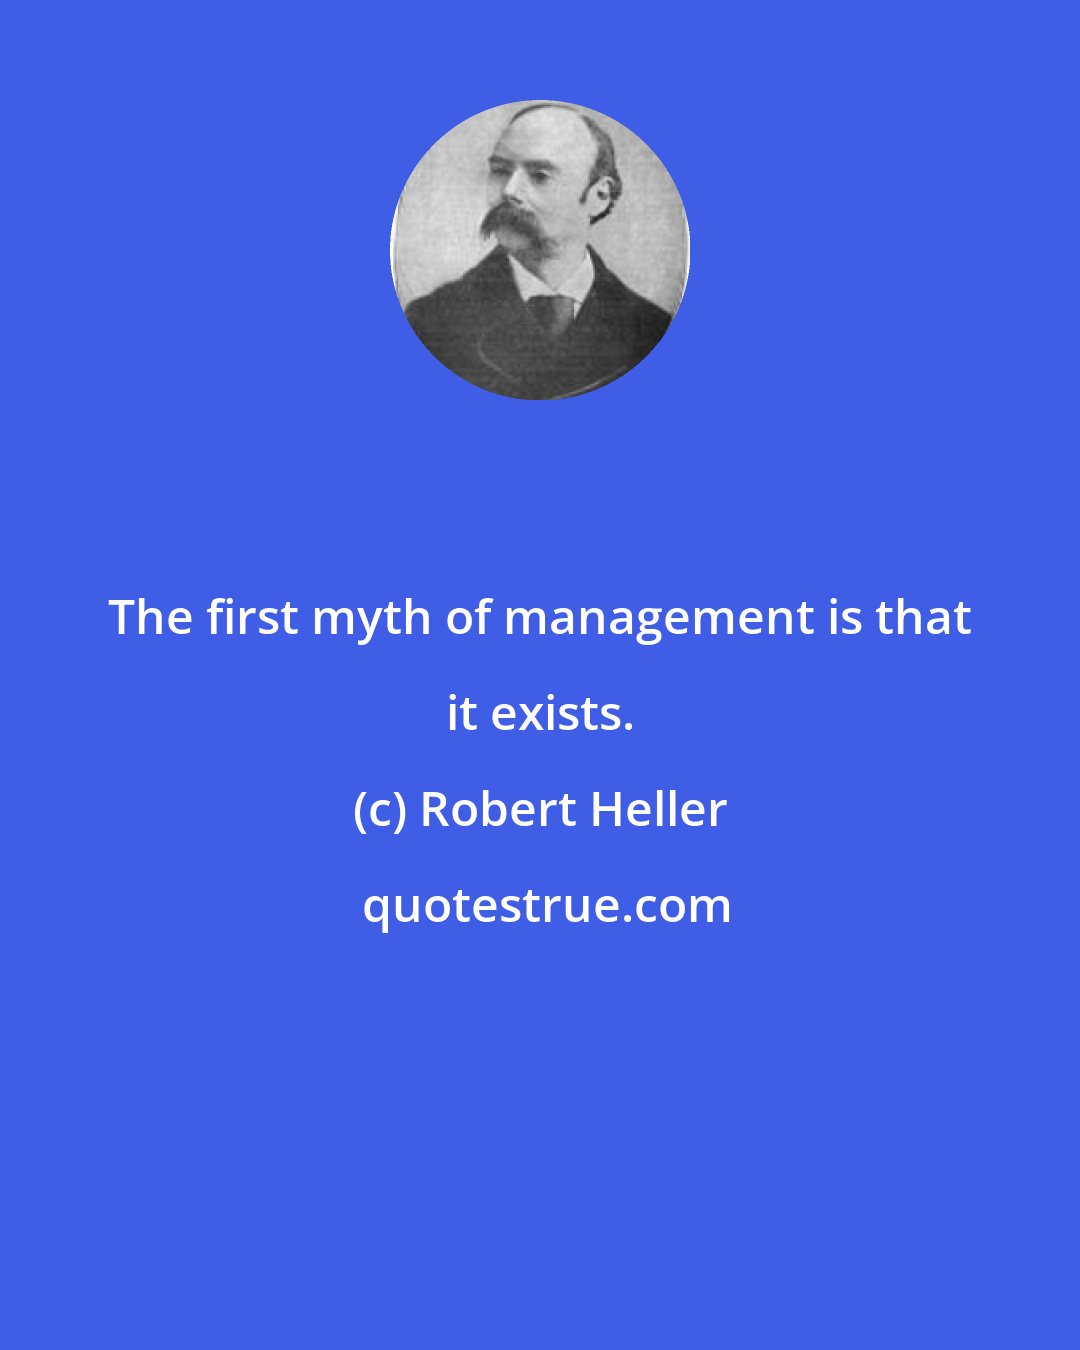 Robert Heller: The first myth of management is that it exists.